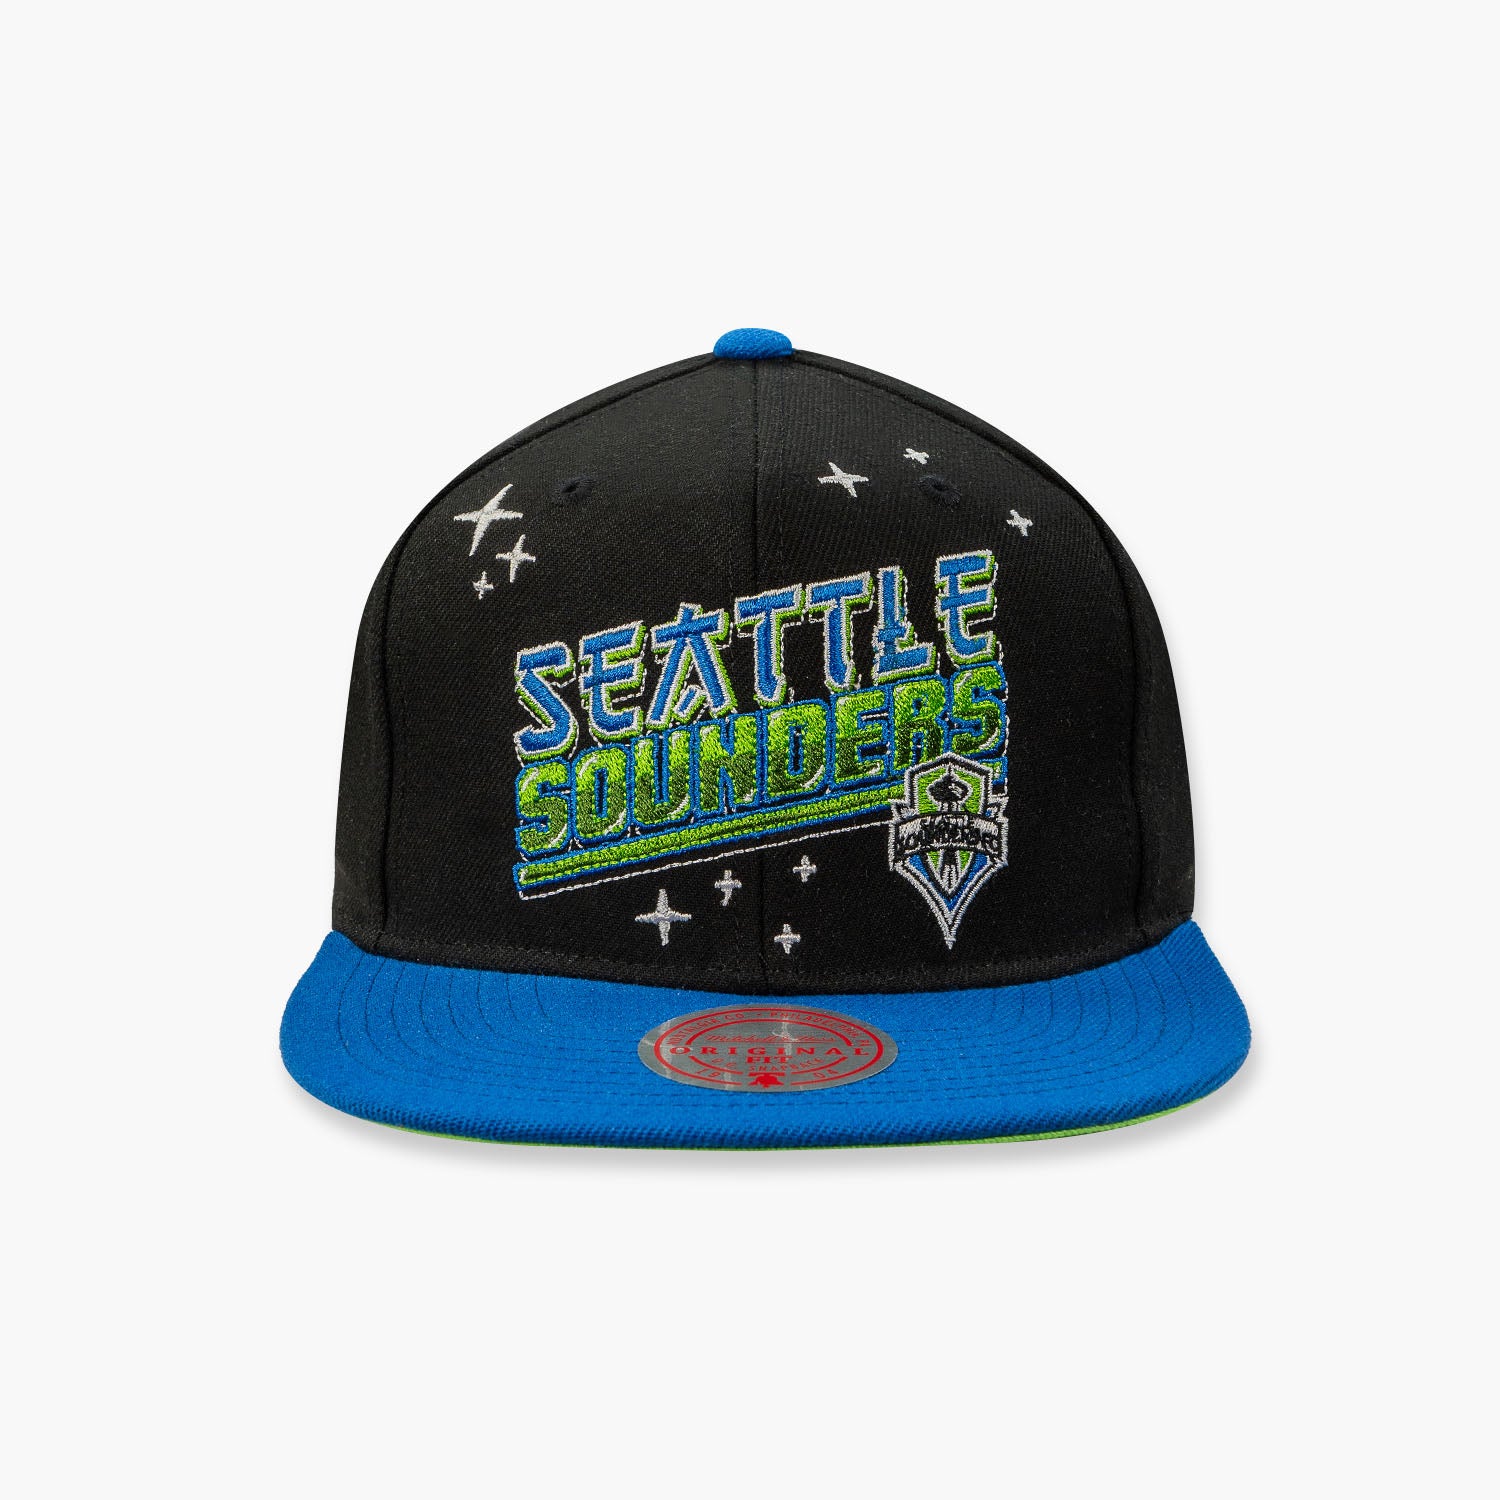 Killua Zoldyck Upside Down Baseball Cap Fun Summer Fashion For Men And  Women Anime Snapback Hat For Cosplay And Dad Style From Zebediaherry, $7.49  | DHgate.Com